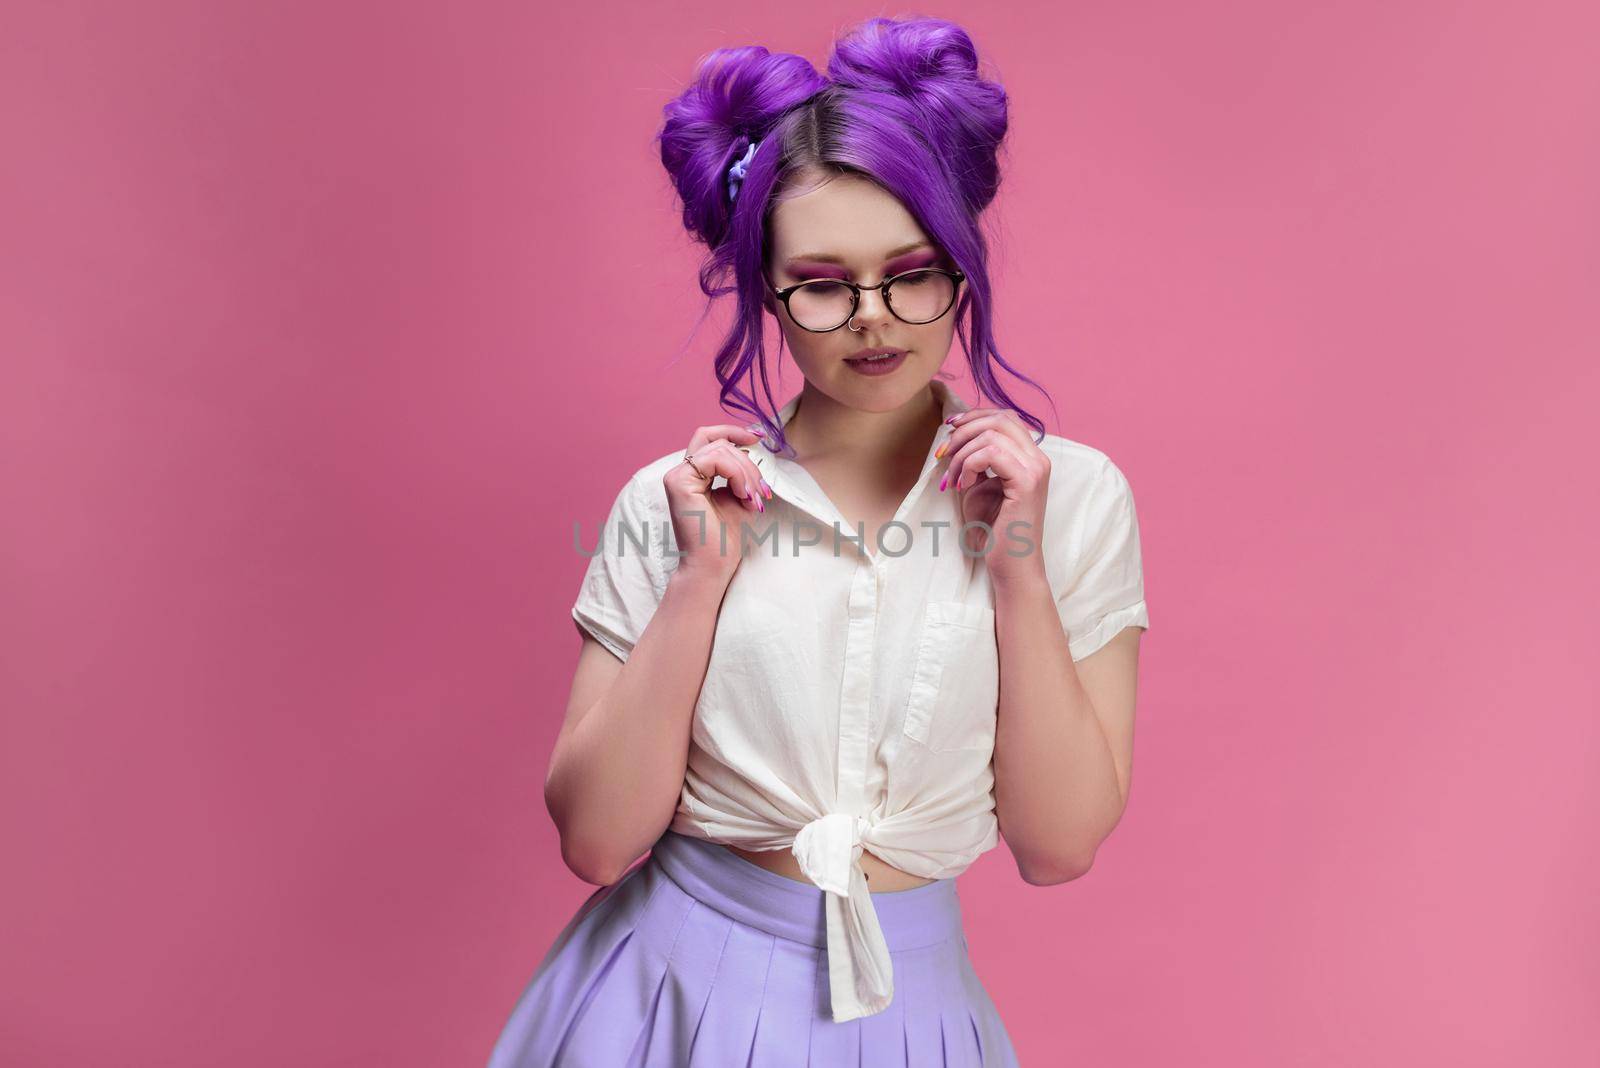 the bright girl with purple hair wearing glasses portrait on pink background